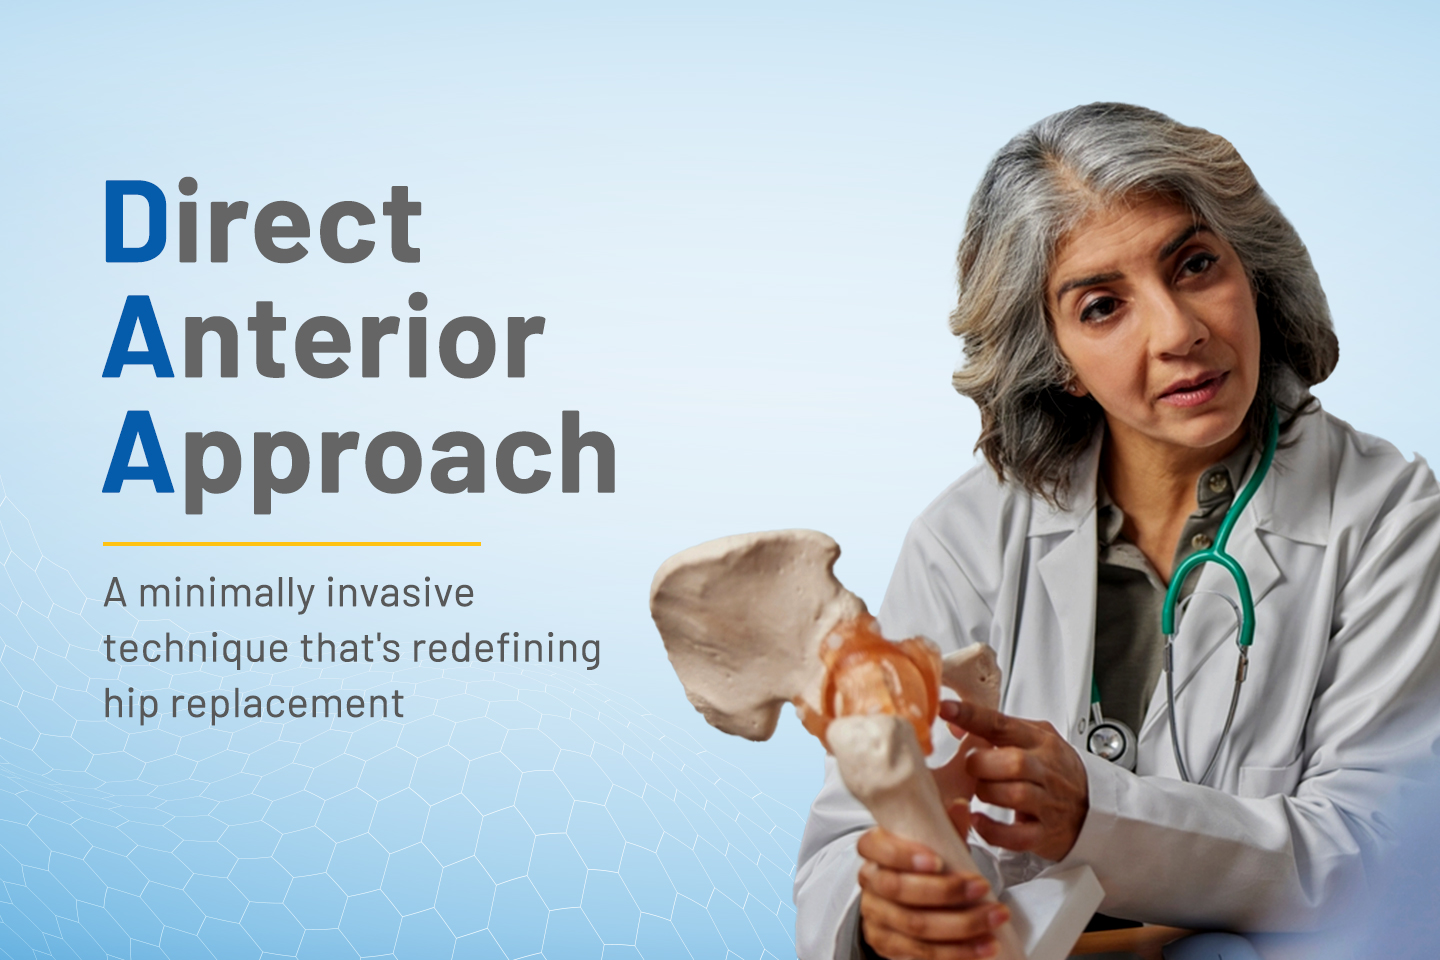 The Direct Anterior Approach updated